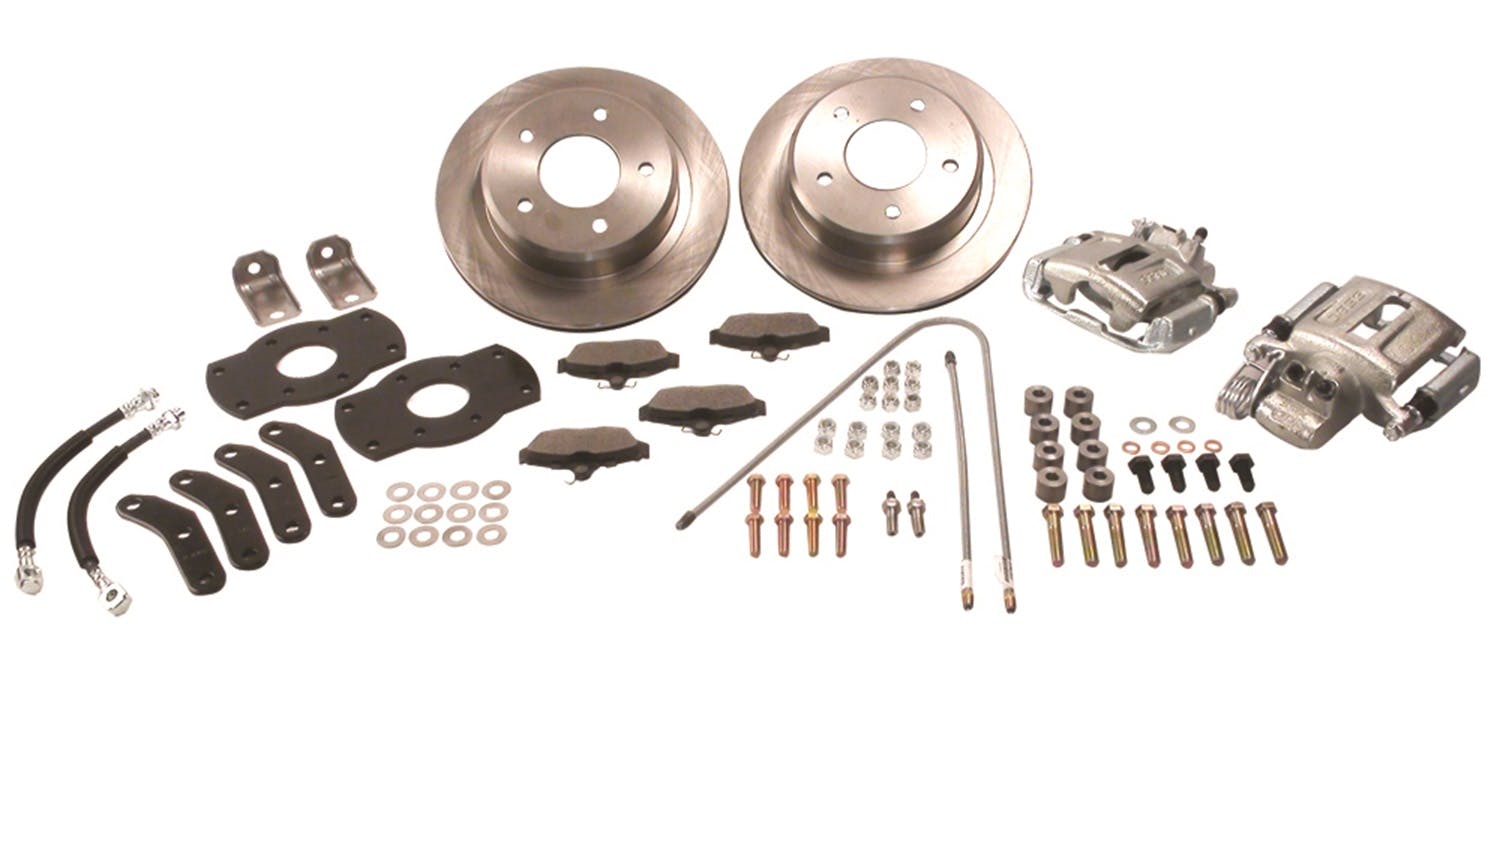 Stainless Steel Brakes A128-1R Kit A128-1 w/red calipers